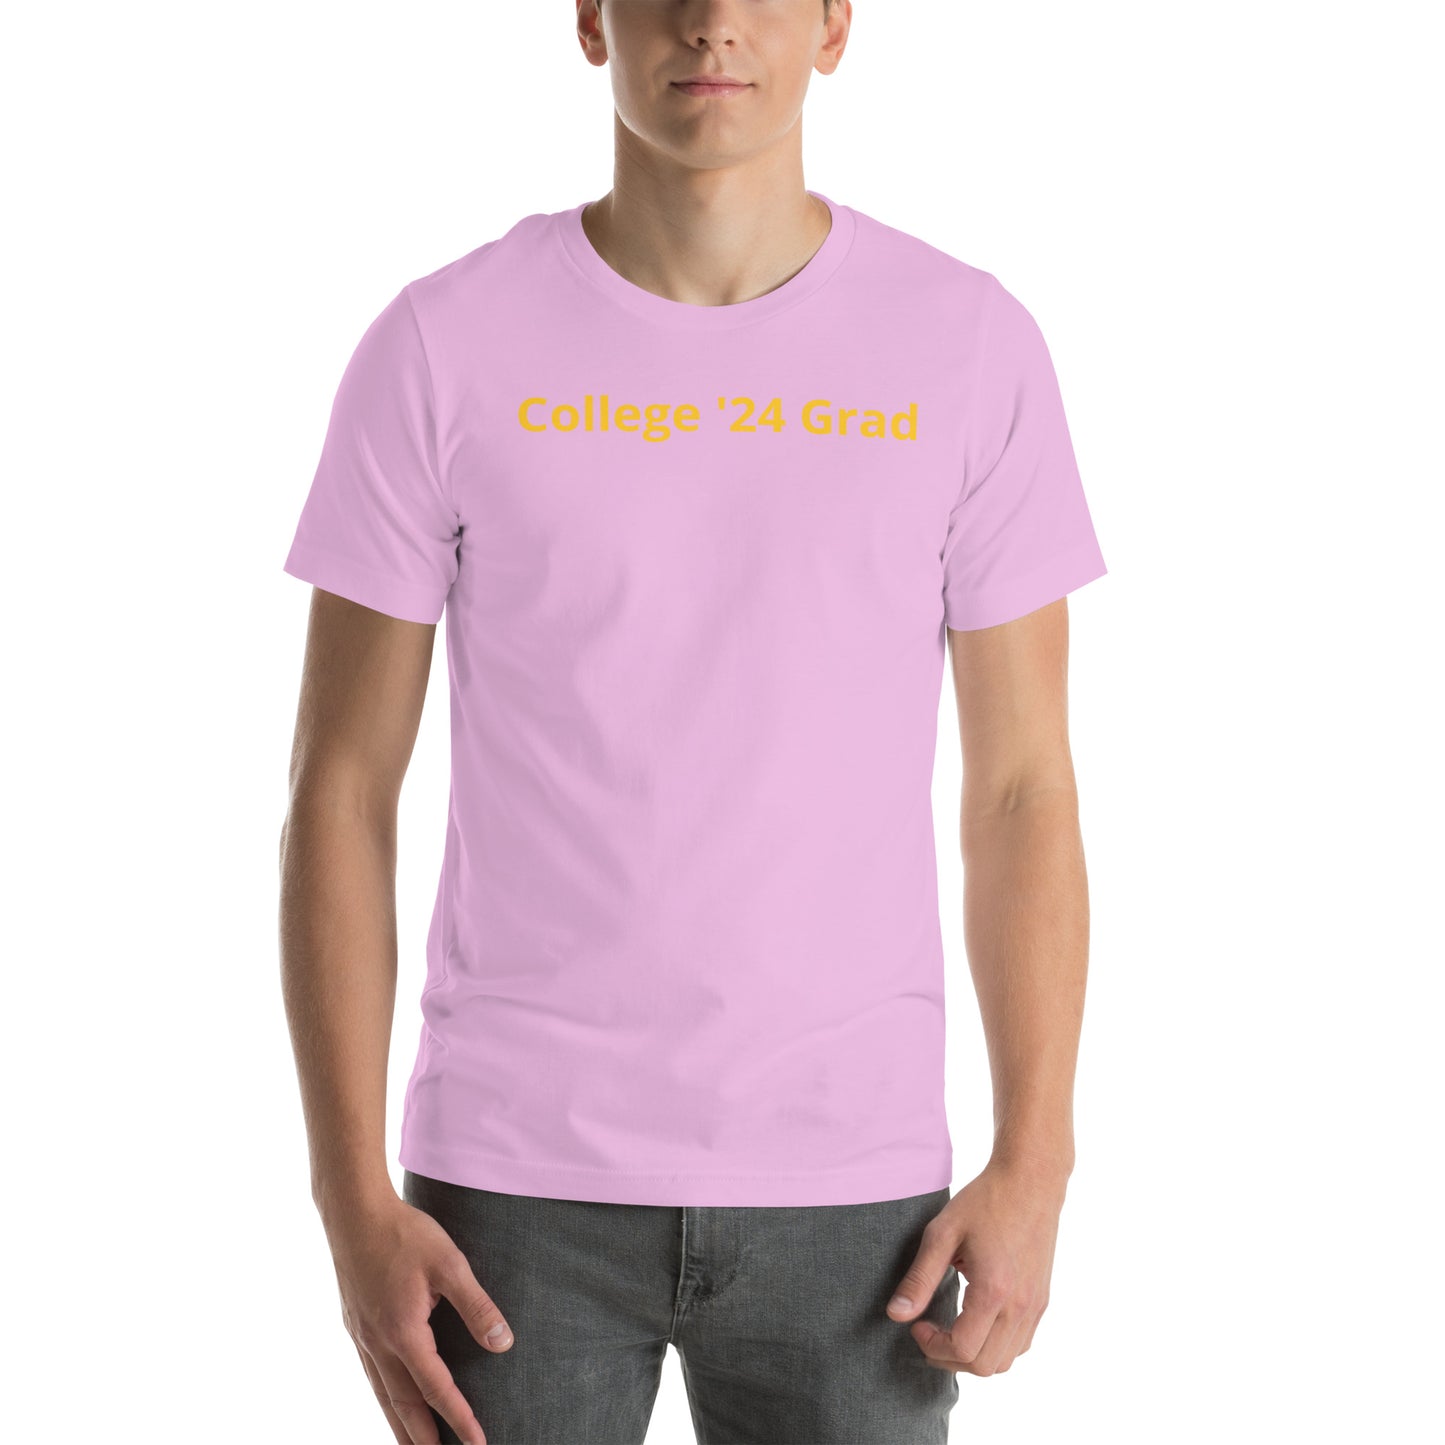 Lilac color short sleeve tee shirt that says "College '24 Grad" on the front and "Thank you, Mom & Dad" on the back in yellow-gold font